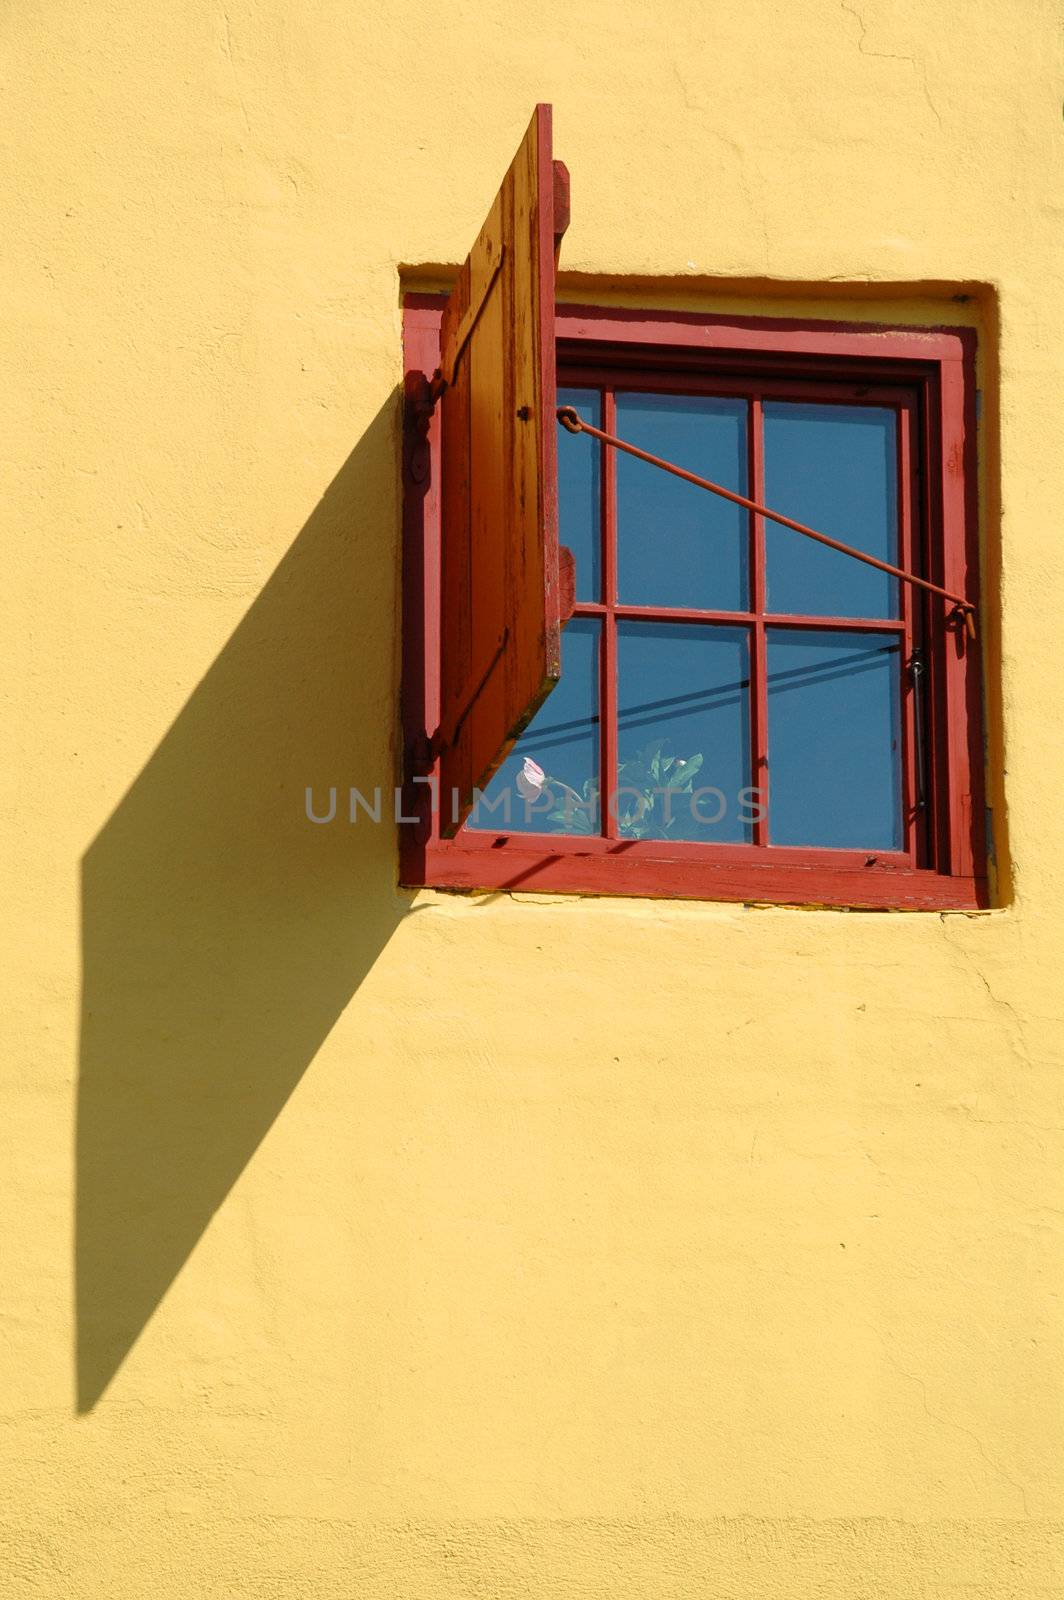 Window and shadow. The window is red and the wall is yellow.